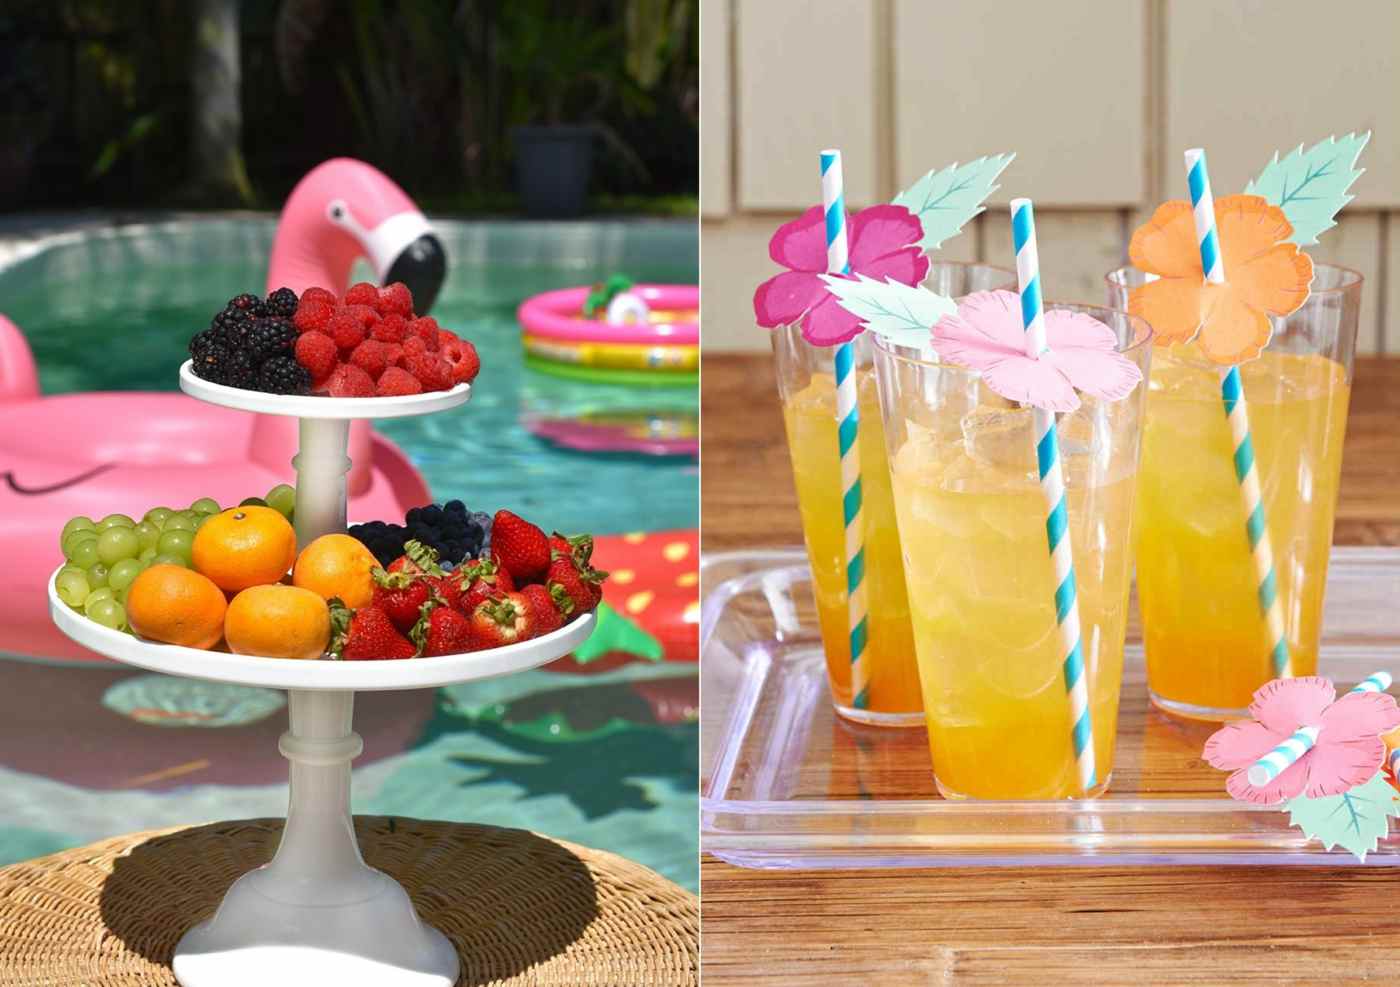 Lemonade and freshly prepared dishes on the children's day party